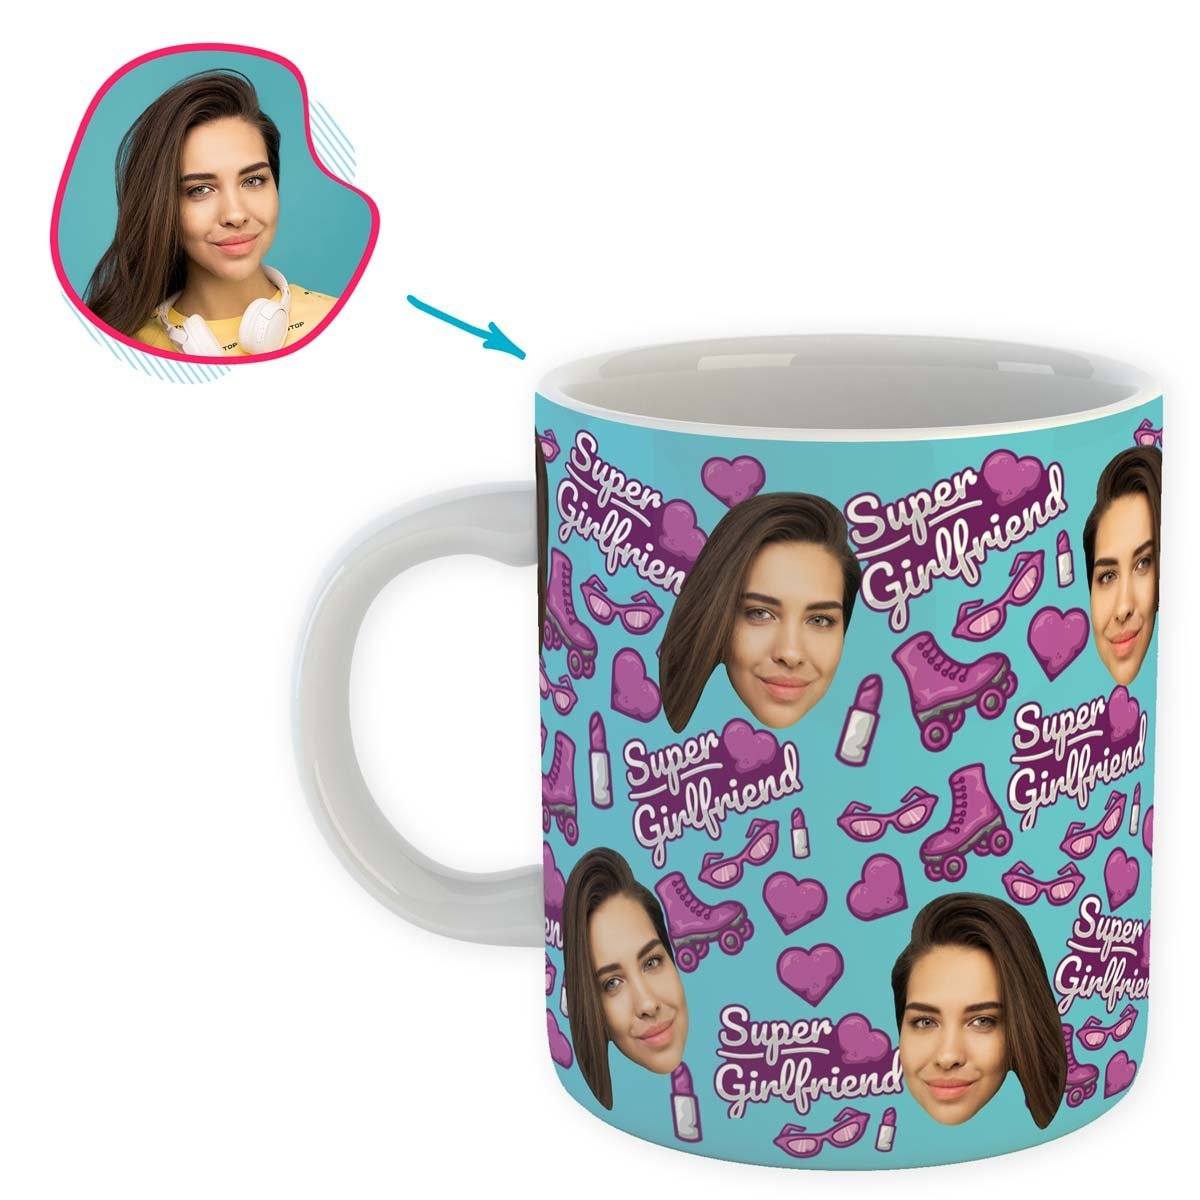 Blue Girlfriend personalized mug with photo of face printed on it